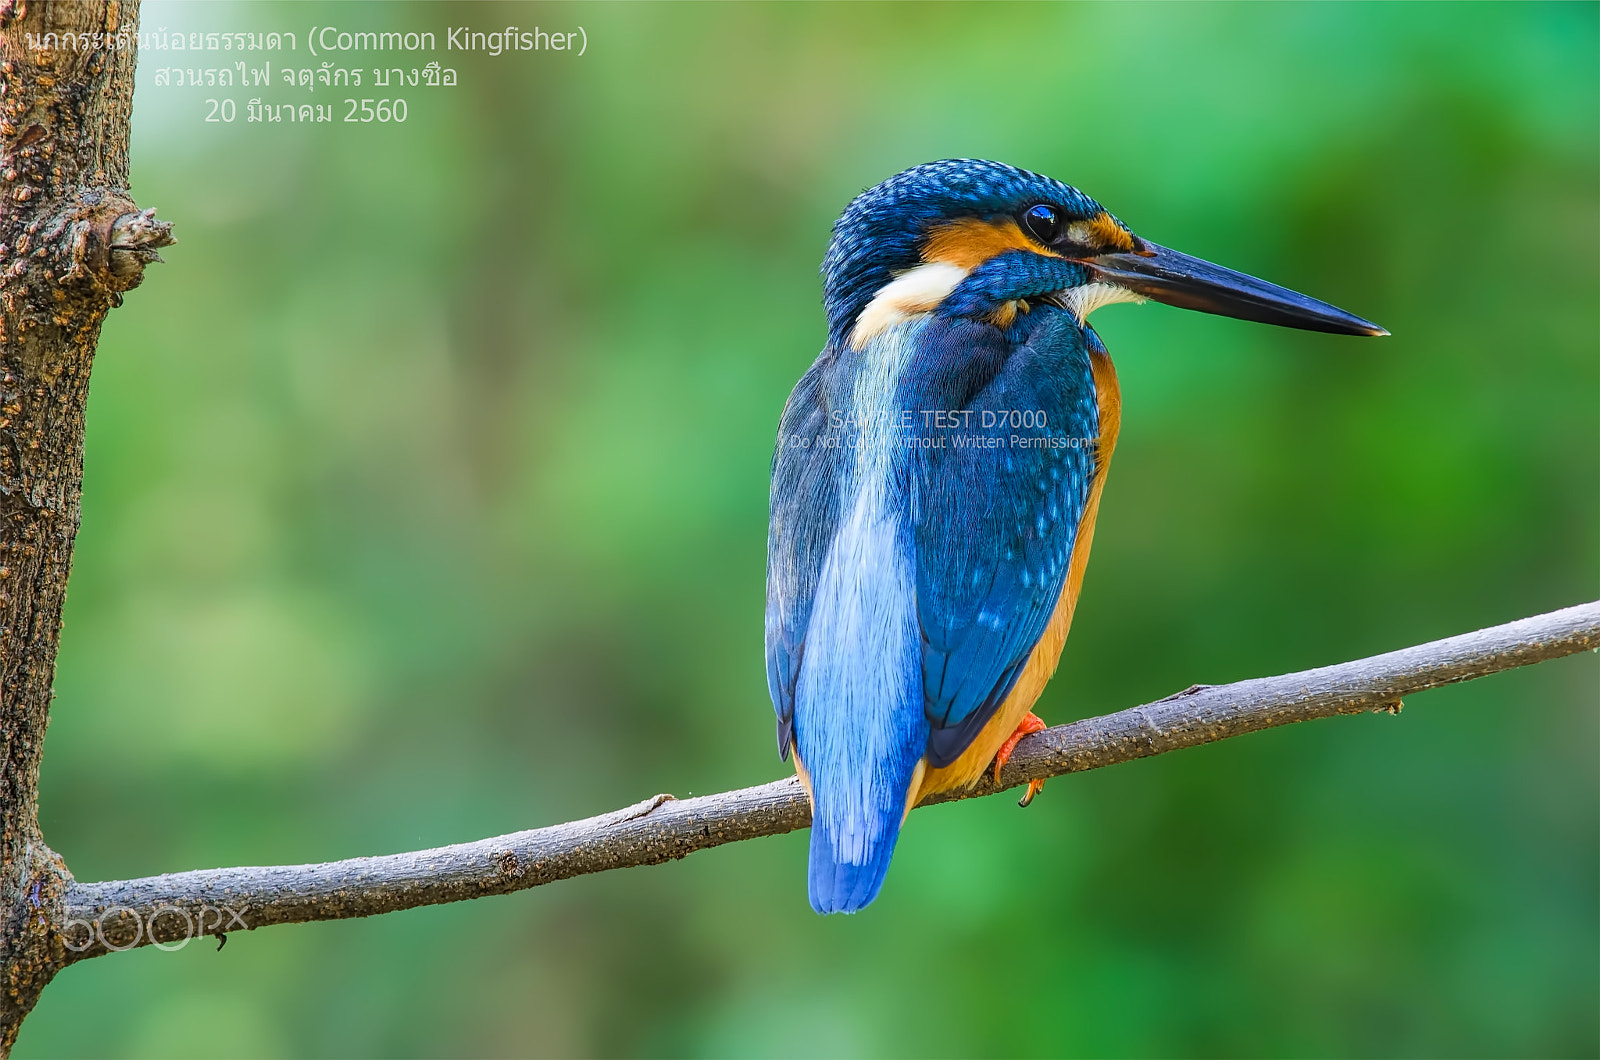 AF Nikkor 300mm f/4 IF-ED sample photo. Common kingfisher photography